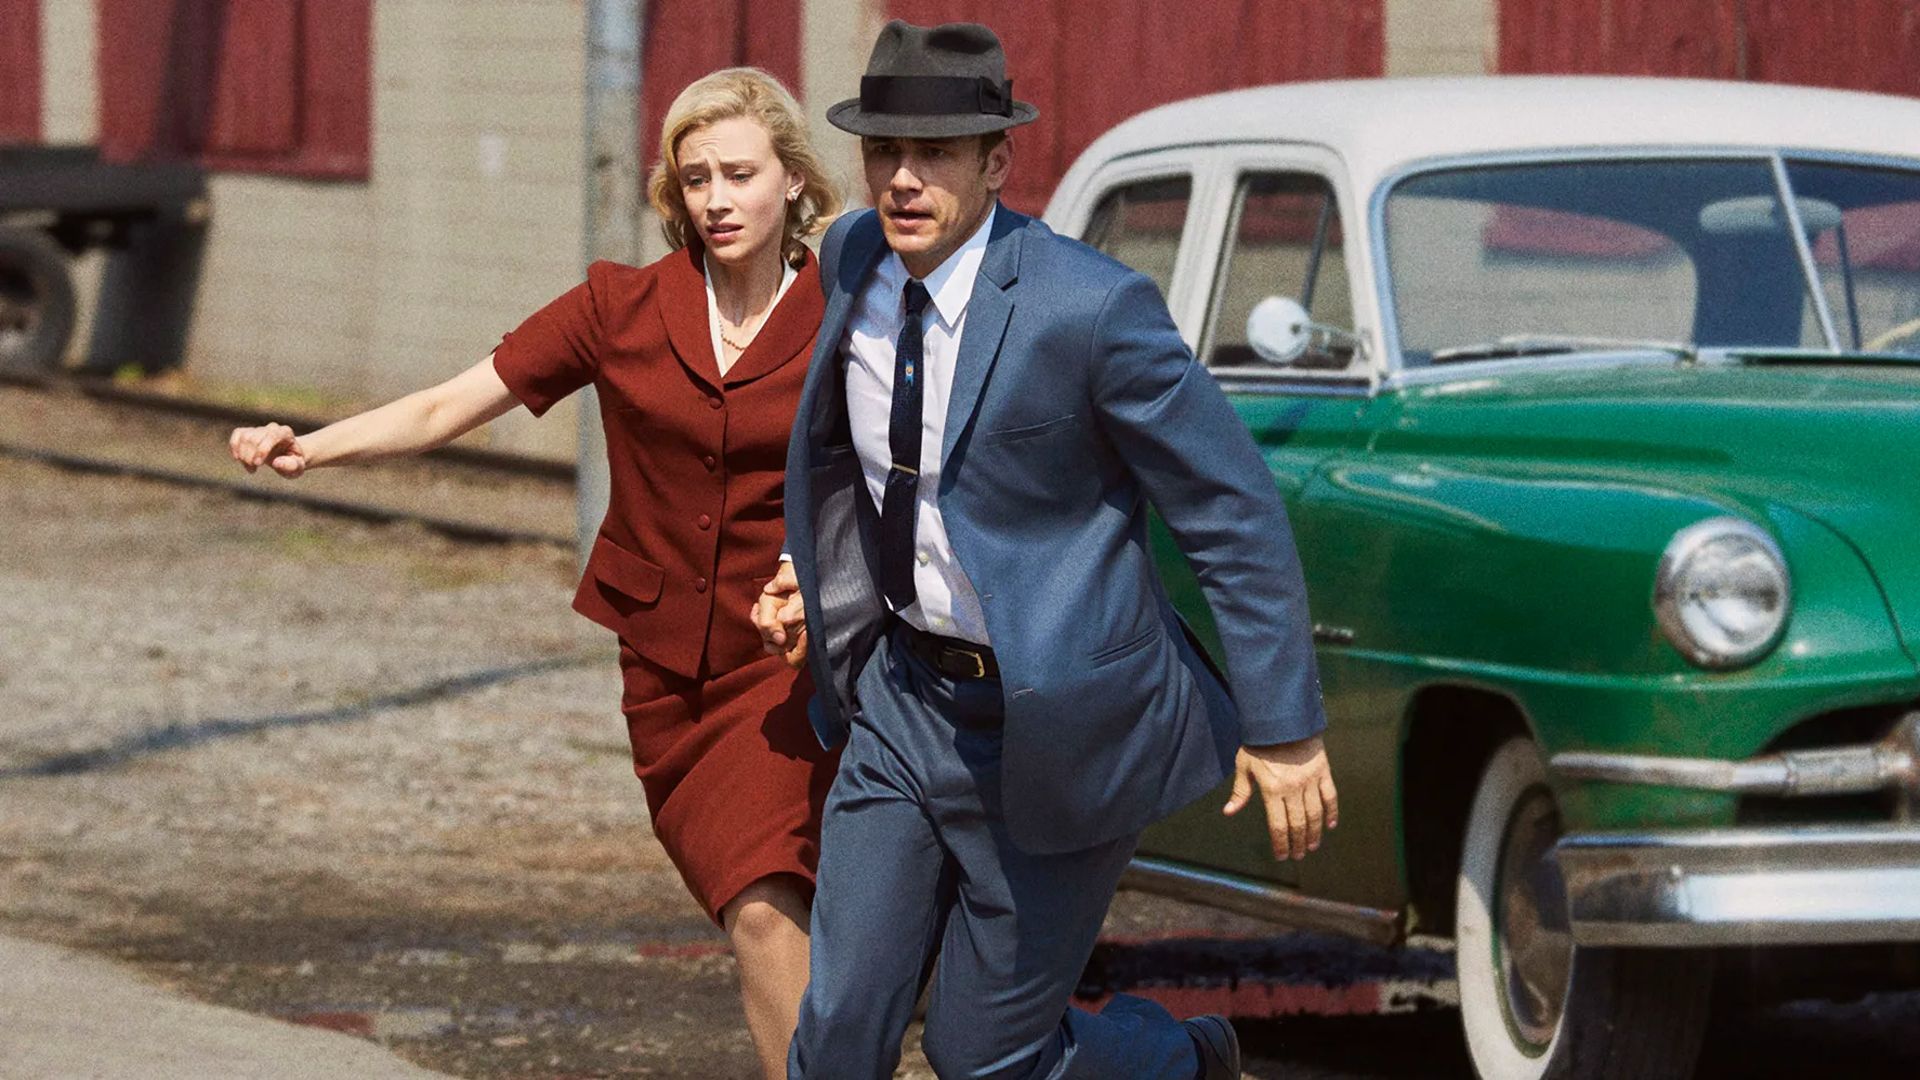 Jake and Sadie run by a car in 11.22.63